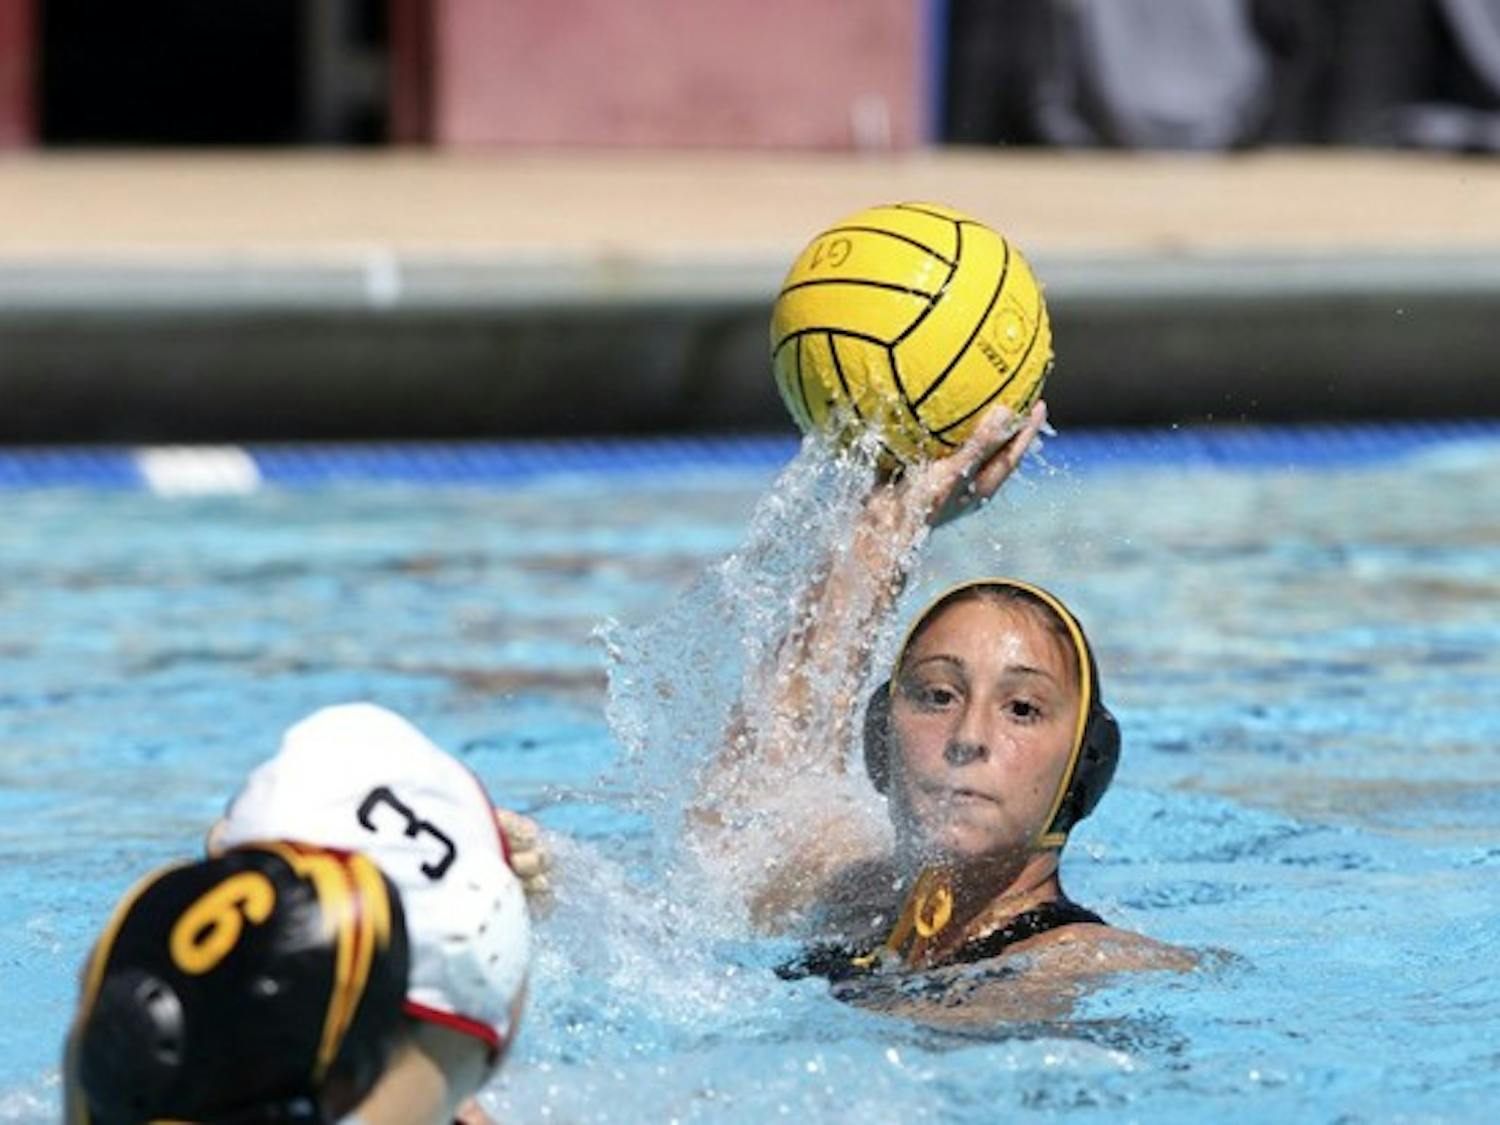 Mariam Salloum prepares to pass the ball in a game against San Diego State on March 3. Salloum, a senior, plans to return home to Germany after this year to attend graduate school and continue playing water polo. (Photo by Sam Rosenbaum)